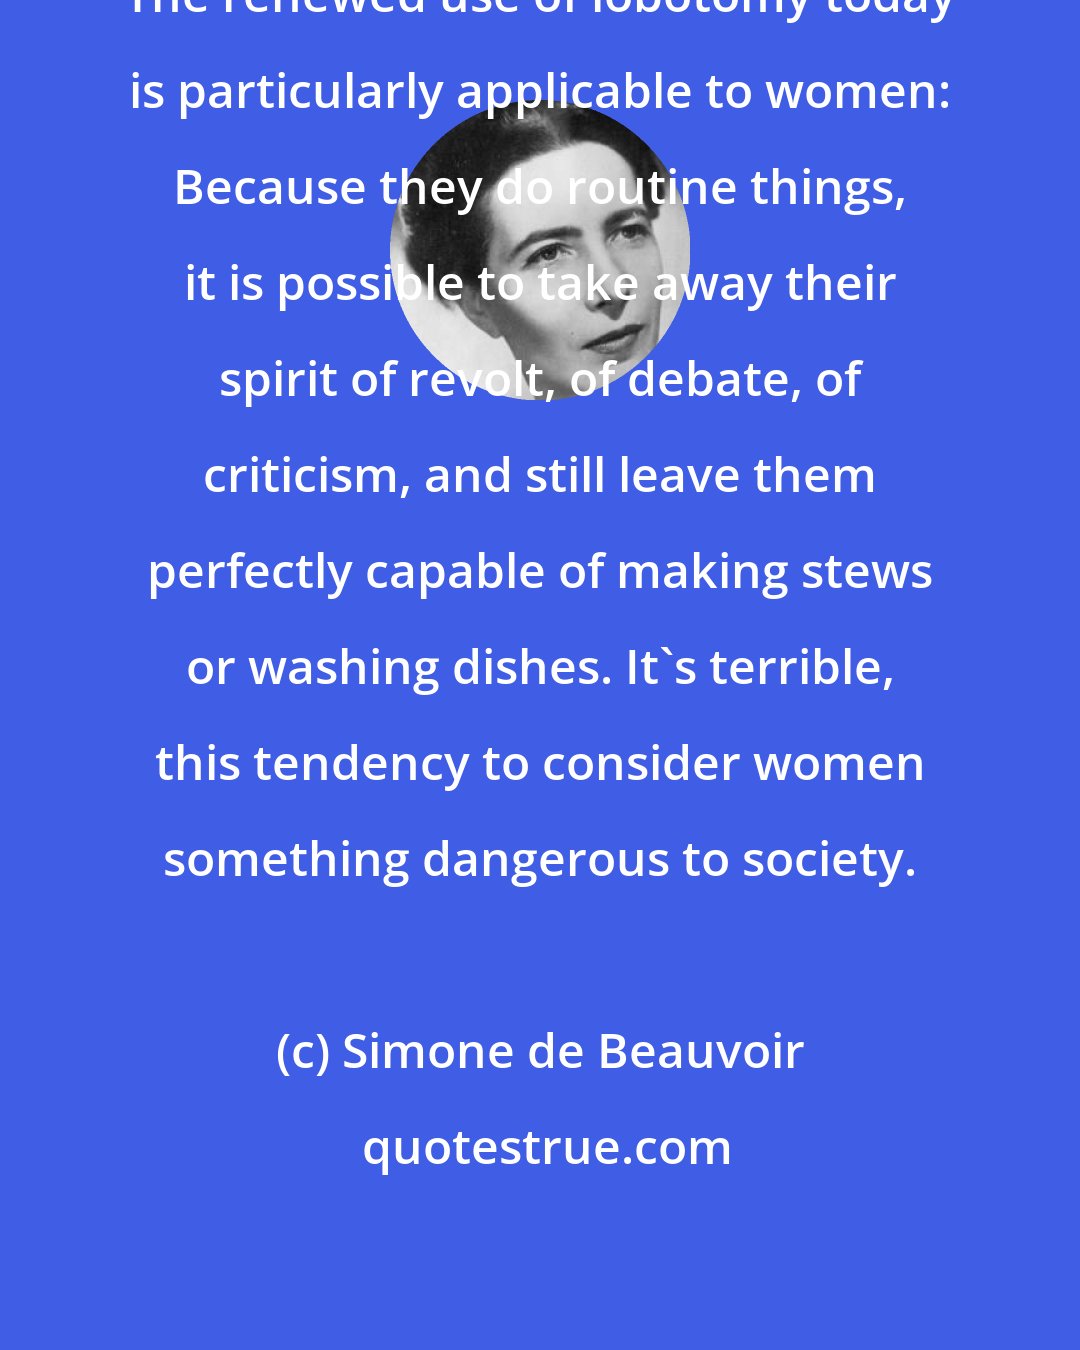 Simone de Beauvoir: The renewed use of lobotomy today is particularly applicable to women: Because they do routine things, it is possible to take away their spirit of revolt, of debate, of criticism, and still leave them perfectly capable of making stews or washing dishes. It's terrible, this tendency to consider women something dangerous to society.